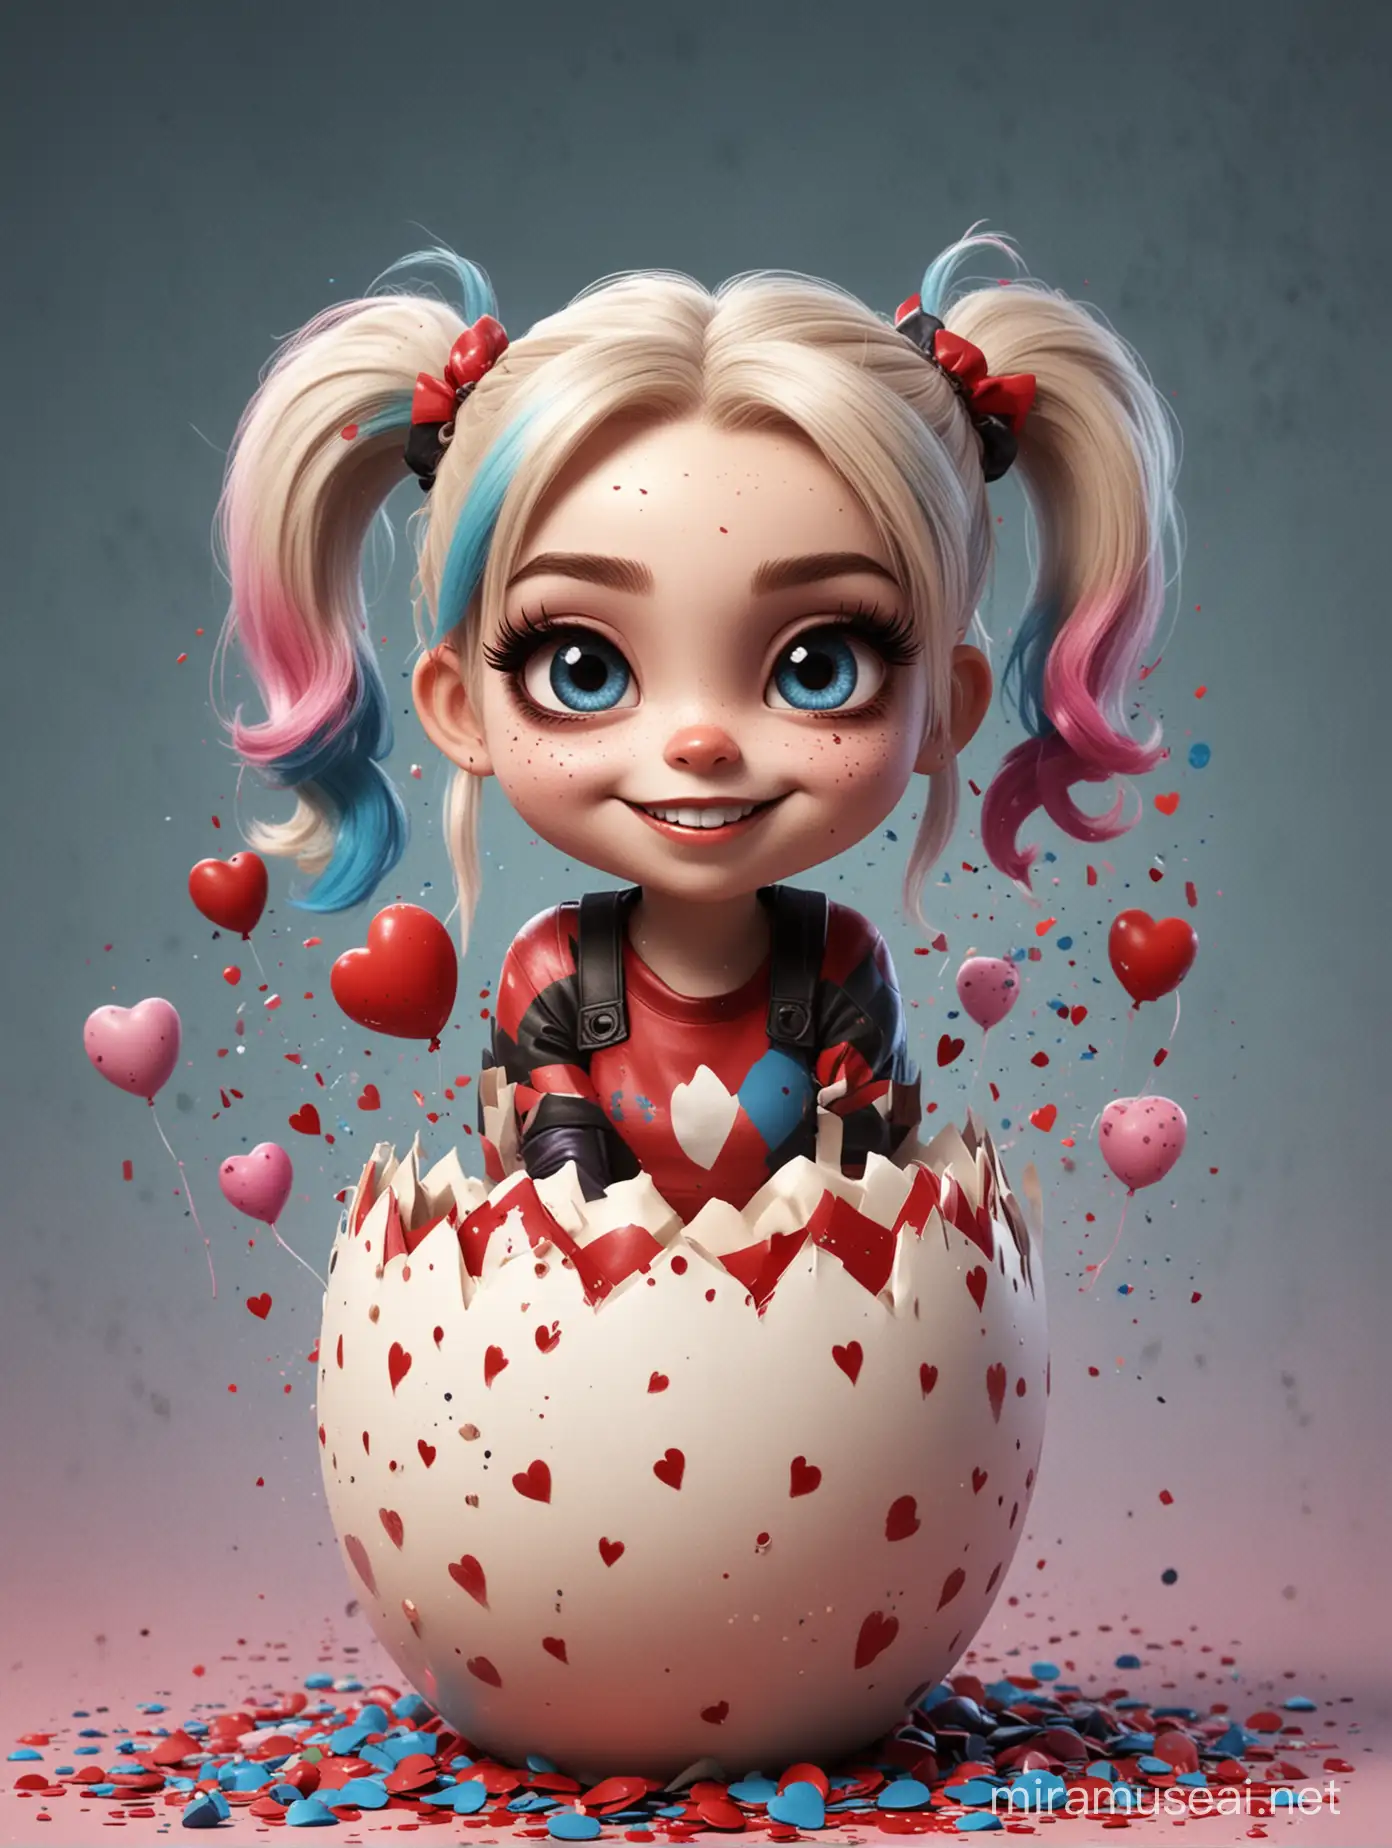 Chibi Style Baby Harley Quinn Hatching with Spiderweb Egg